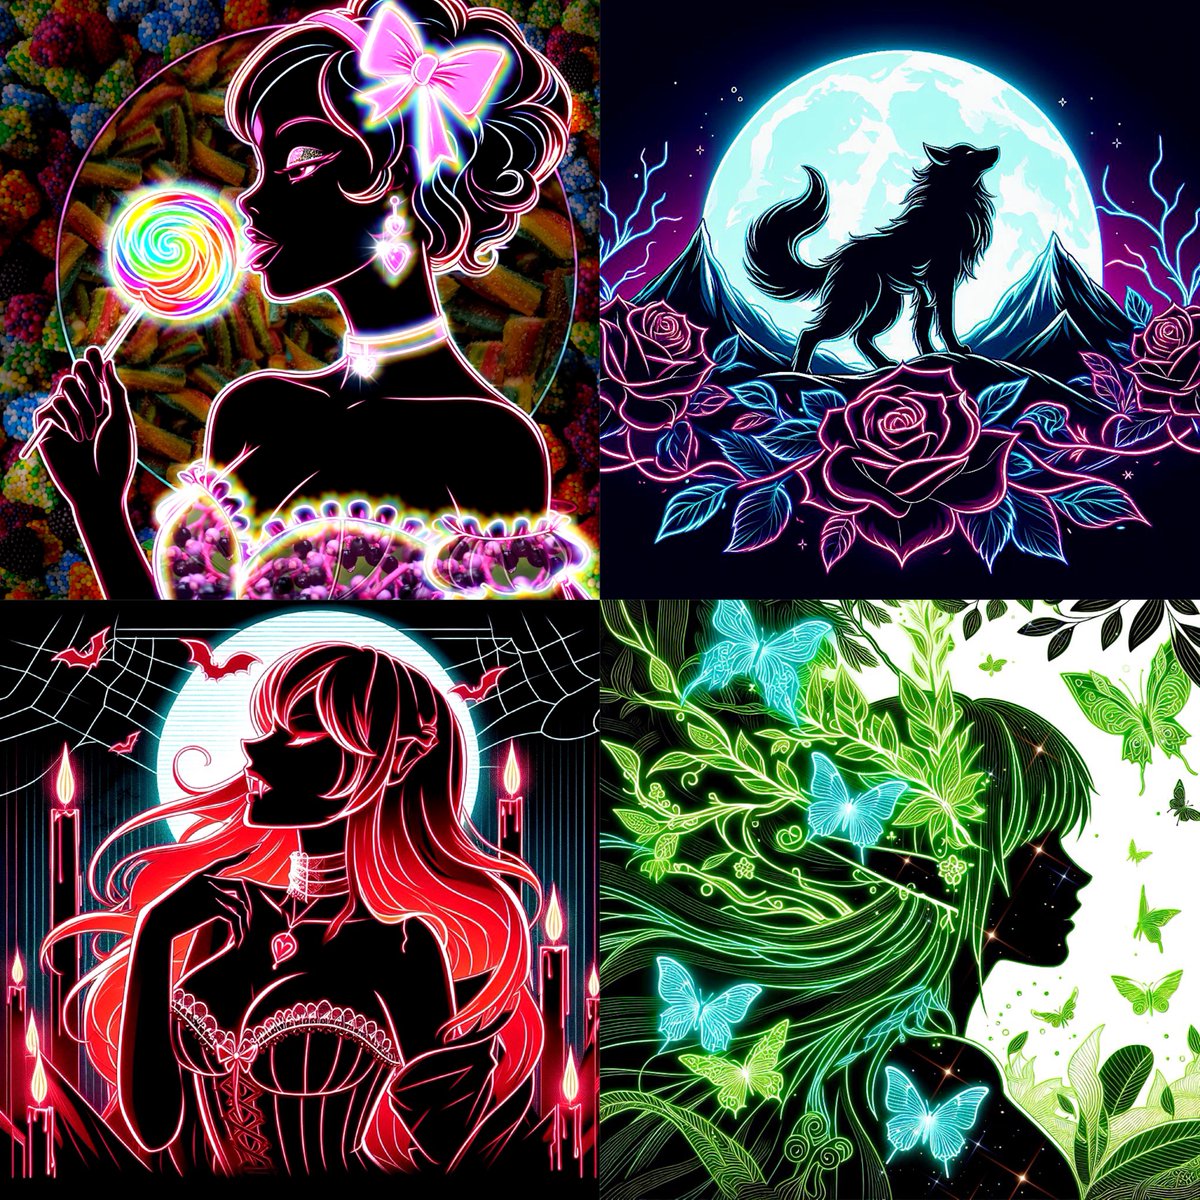 @Karanpal25 “Glowing Shadows” collection ✨

1.Candy shop (Collaboration with @libertyvisions_  )
❣️6/8, 8 $XTZ

2.A lonely wolf
❣️4/6, 3.5 $XTZ

3.Deadly charm
❣️4/6, 3.5 $XTZ

4.The Elf’s Grace
❣️4/5, 4 $XTZ

objkt.com/collections/KT…